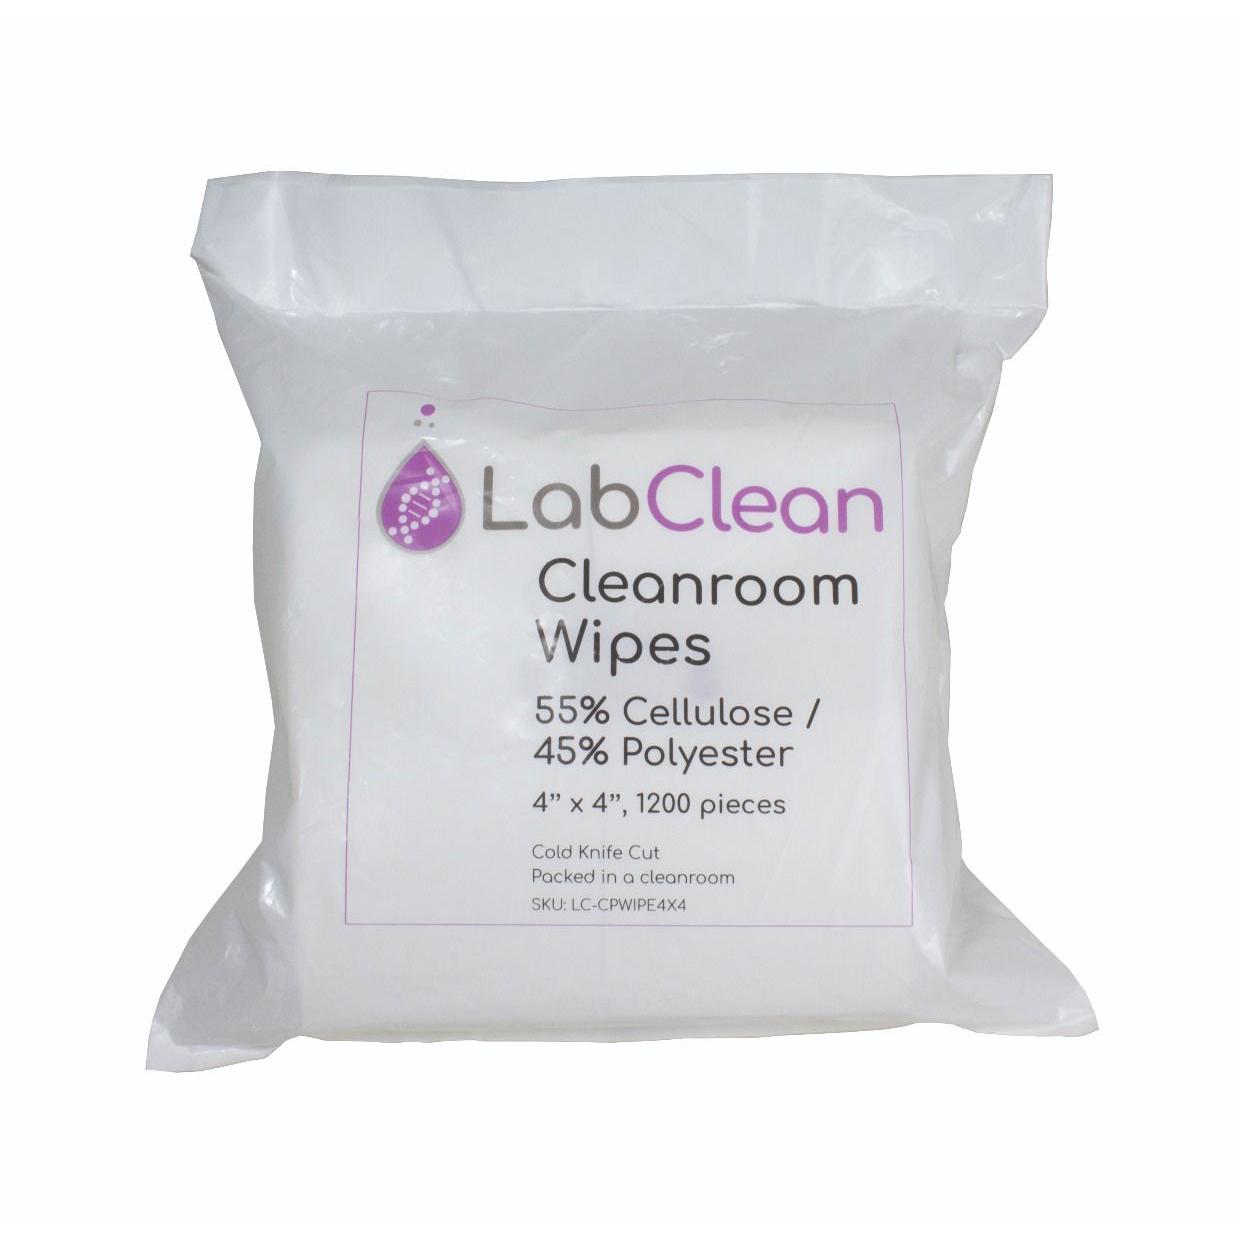 LabClean™ Cleanroom Wipes, 55% Cellulose / 45% Polyester